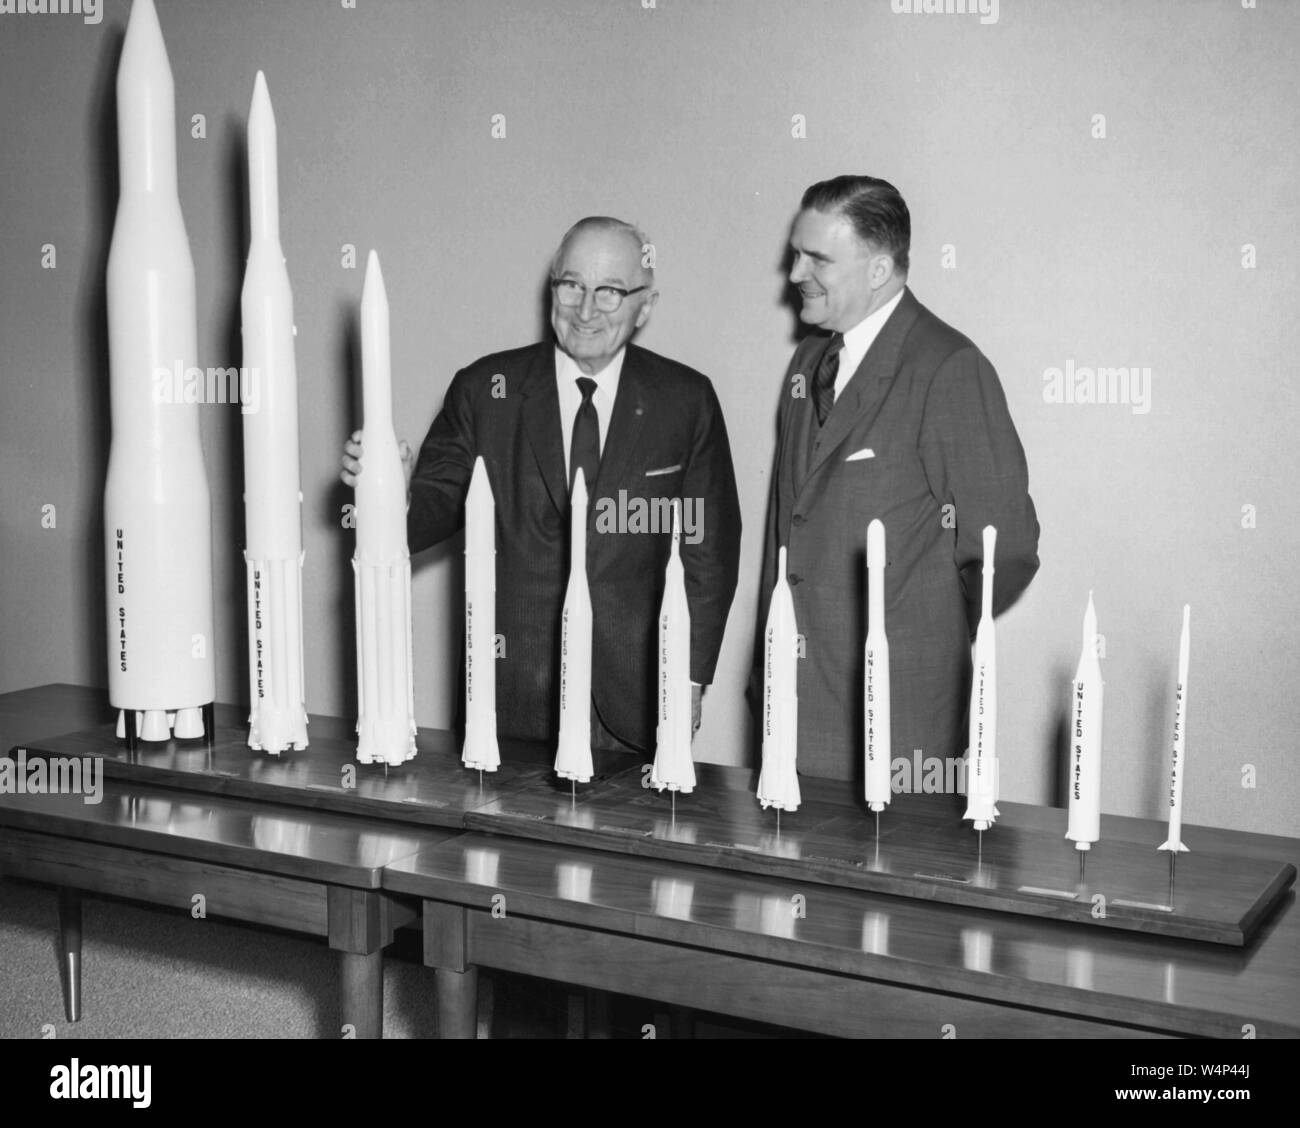 NASA Administrator James E Webb presents a collection of rocket models to President Harry S Truman during a presidential visit to the newly opened NASA Headquarters in Washington, District of Columbia, November 3, 1961. Image courtesy National Aeronautics and Space Administration (NASA). () Stock Photo